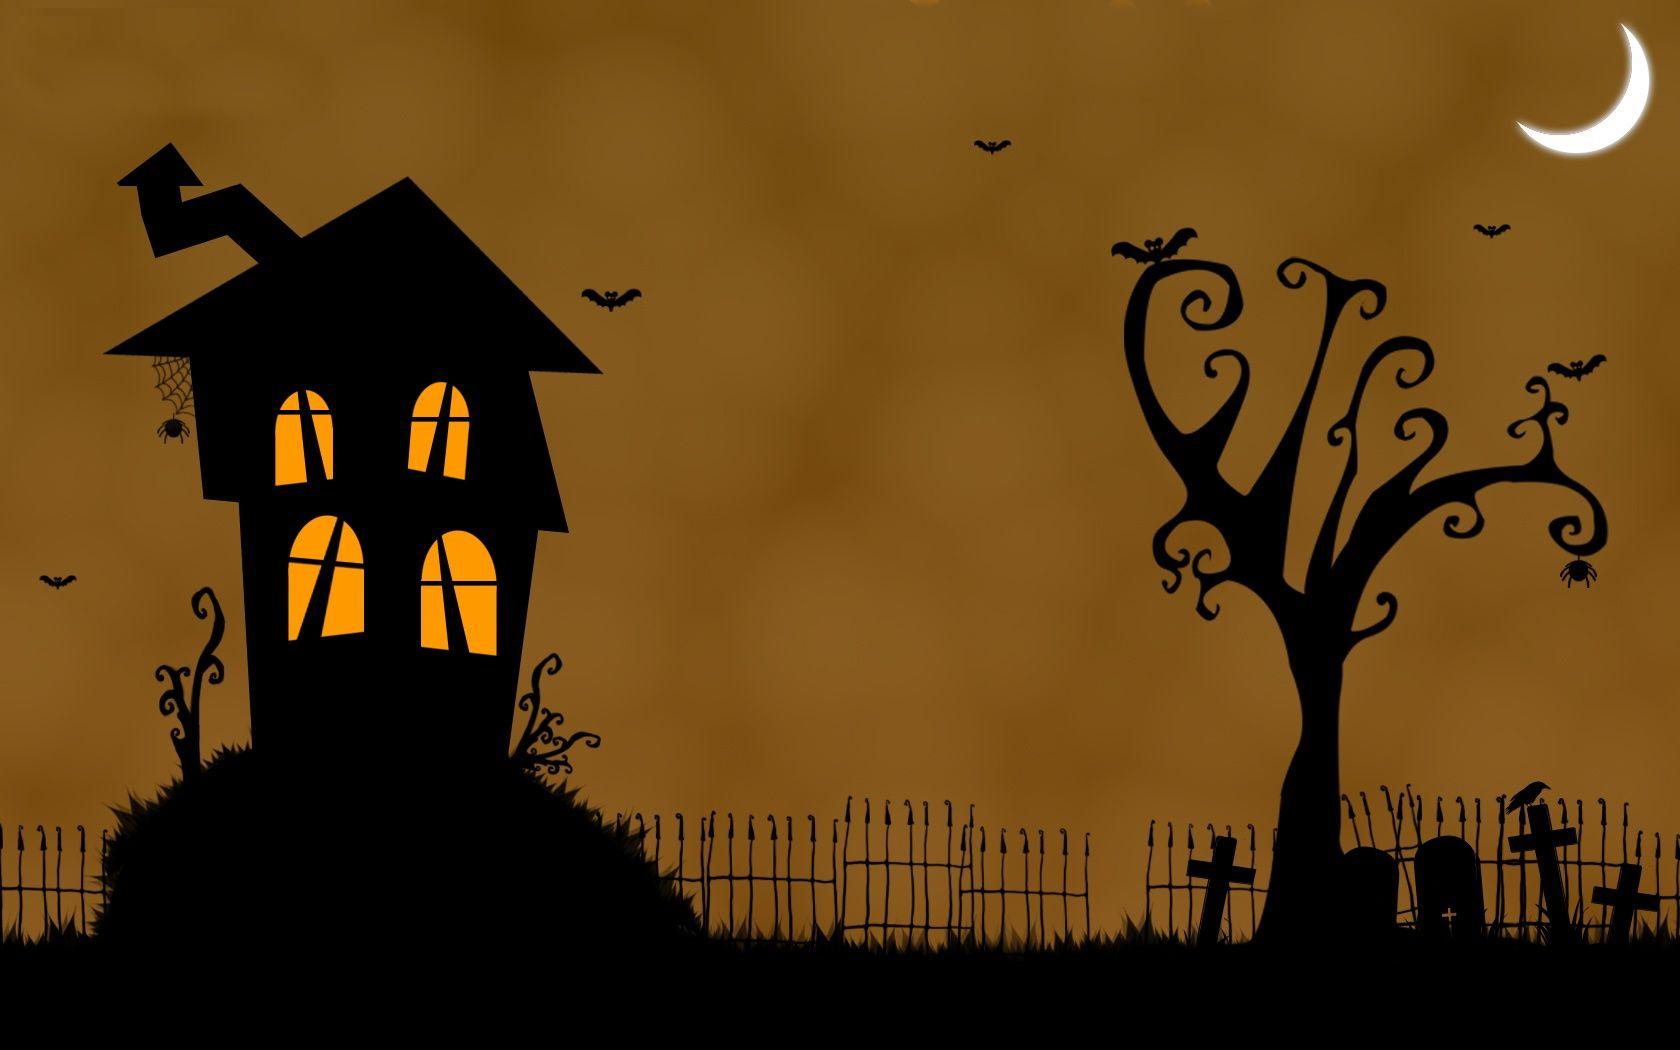 Wallpaper For > Halloween Haunted House Background Image